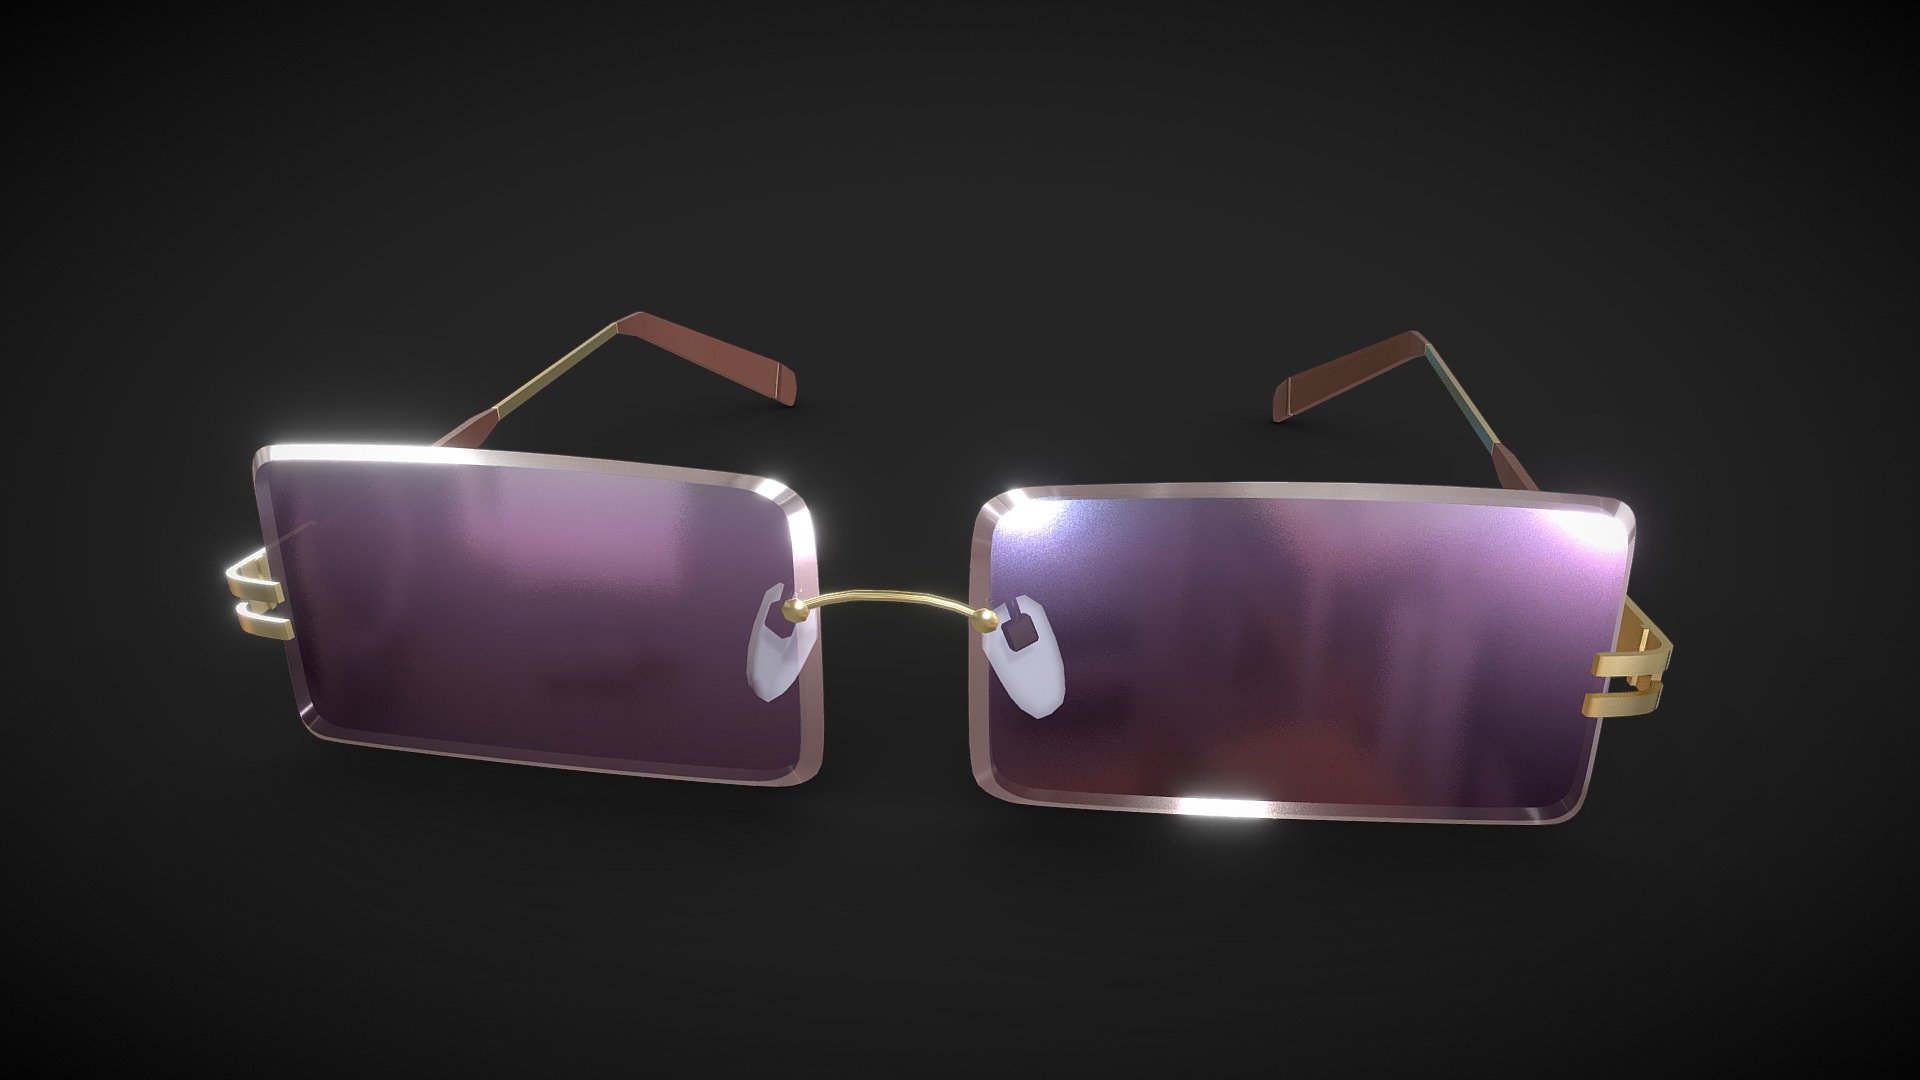 Pink Square Rimless Sunglasses - low poly

Triangles: 3.3k
Vertices: 1.7k

4096x4096 PNG texture

👓  my glasses collection &lt;&lt; - Pink Square Rimless Sunglasses - low poly - Buy Royalty Free 3D model by Karolina Renkiewicz (@KarolinaRenkiewicz) 3d model